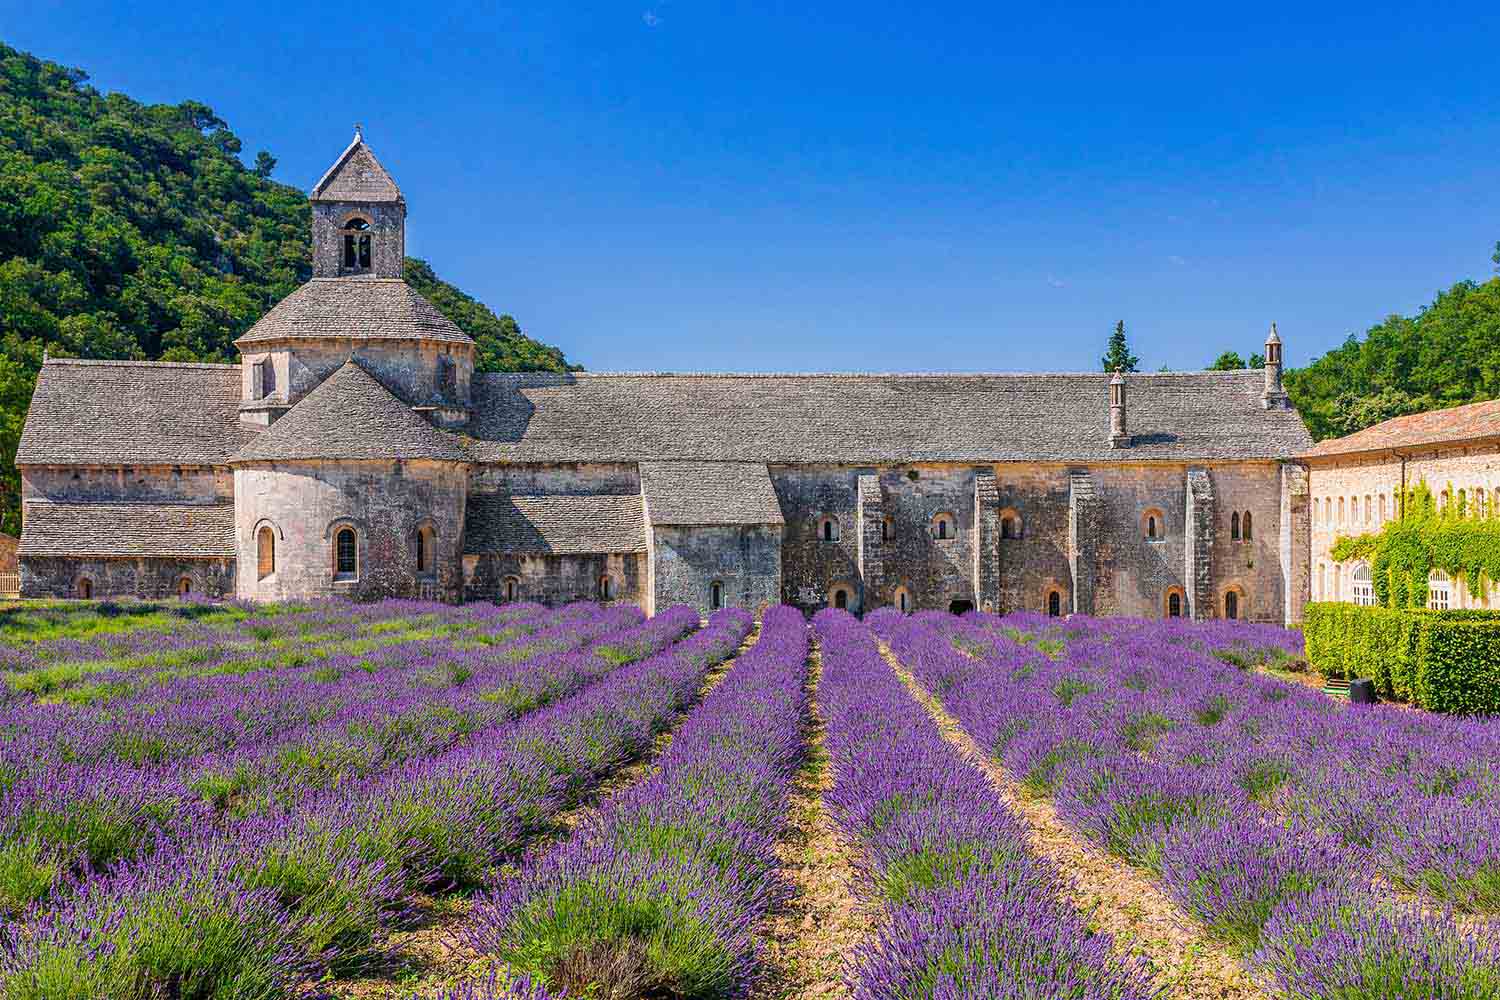 Field of bright purple lavender in front of an old church